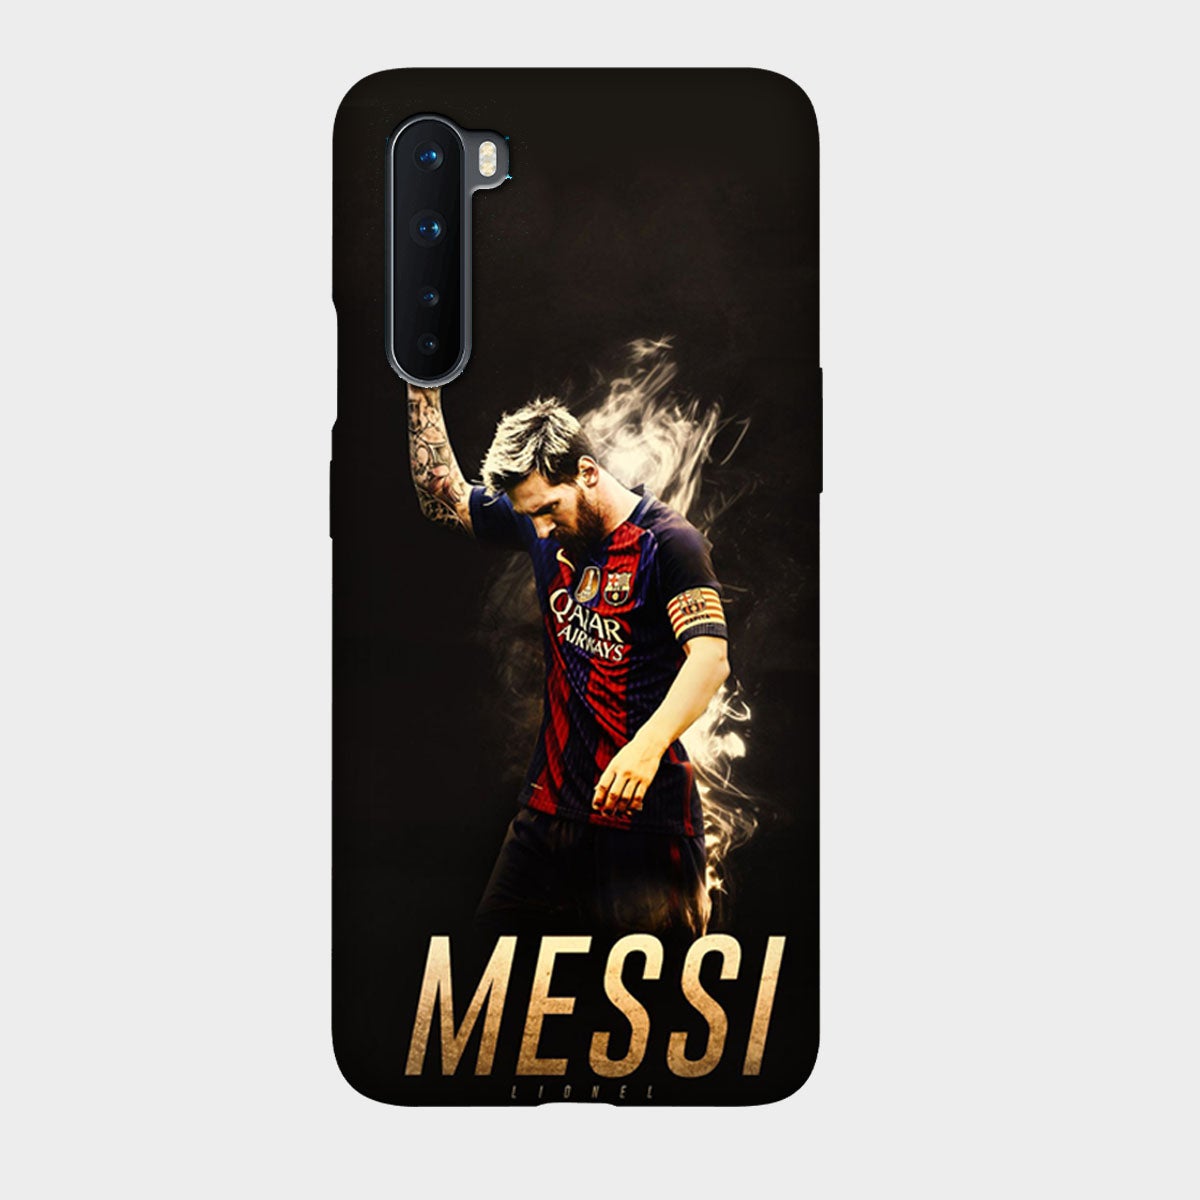 Lionel Messi - Mobile Phone Cover - Hard Case - OnePlus